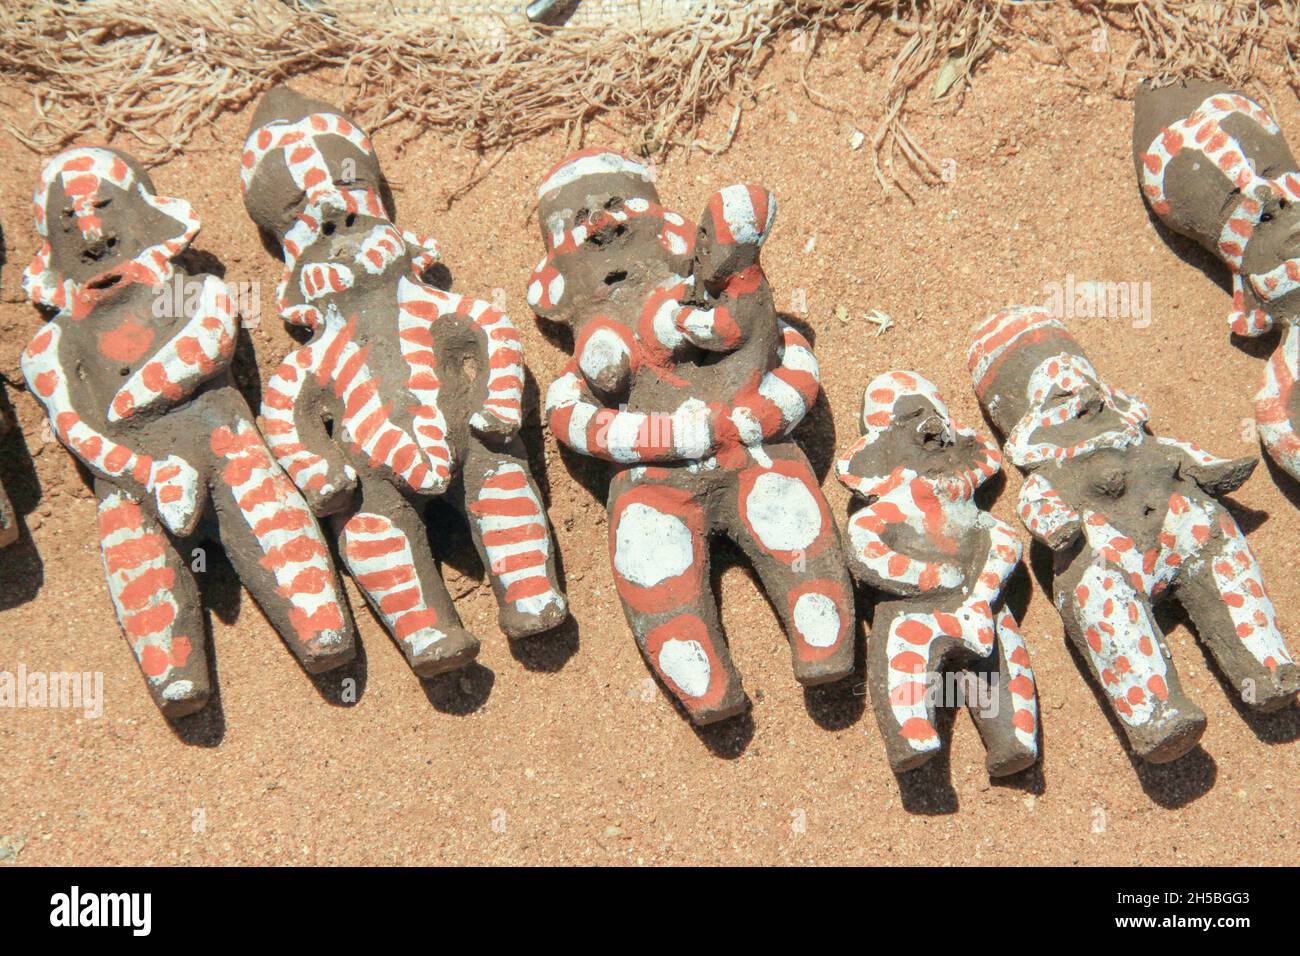 Hamar Tribe hand made clay dolls Photographed in the Omo River Valley, Ethiopia Stock Photo